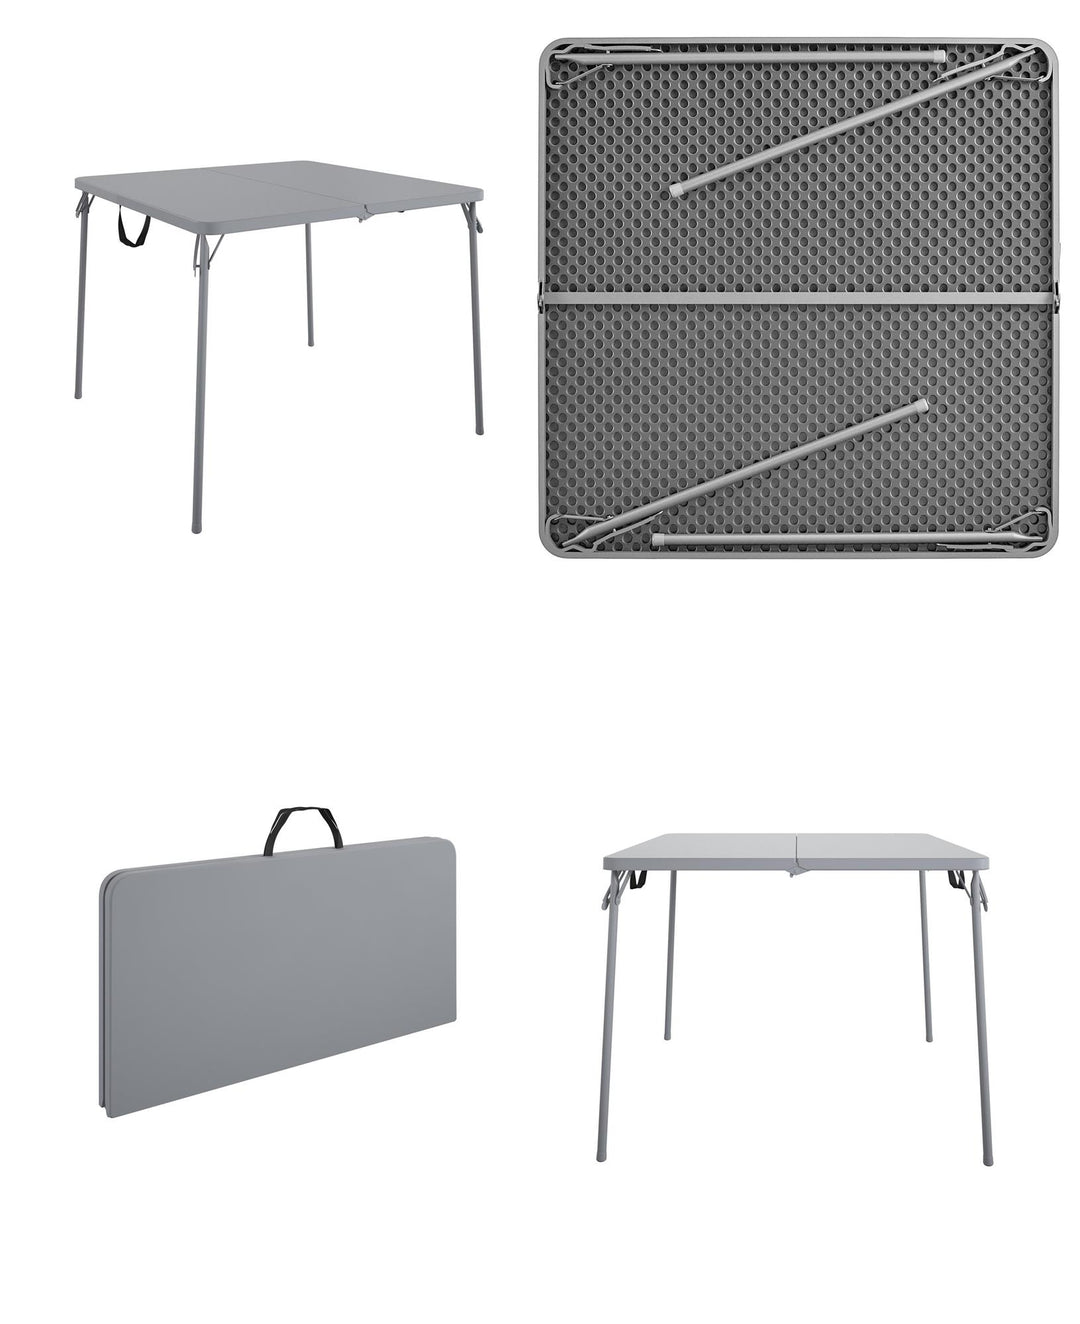 38.5 inch outdoor event table - Gray